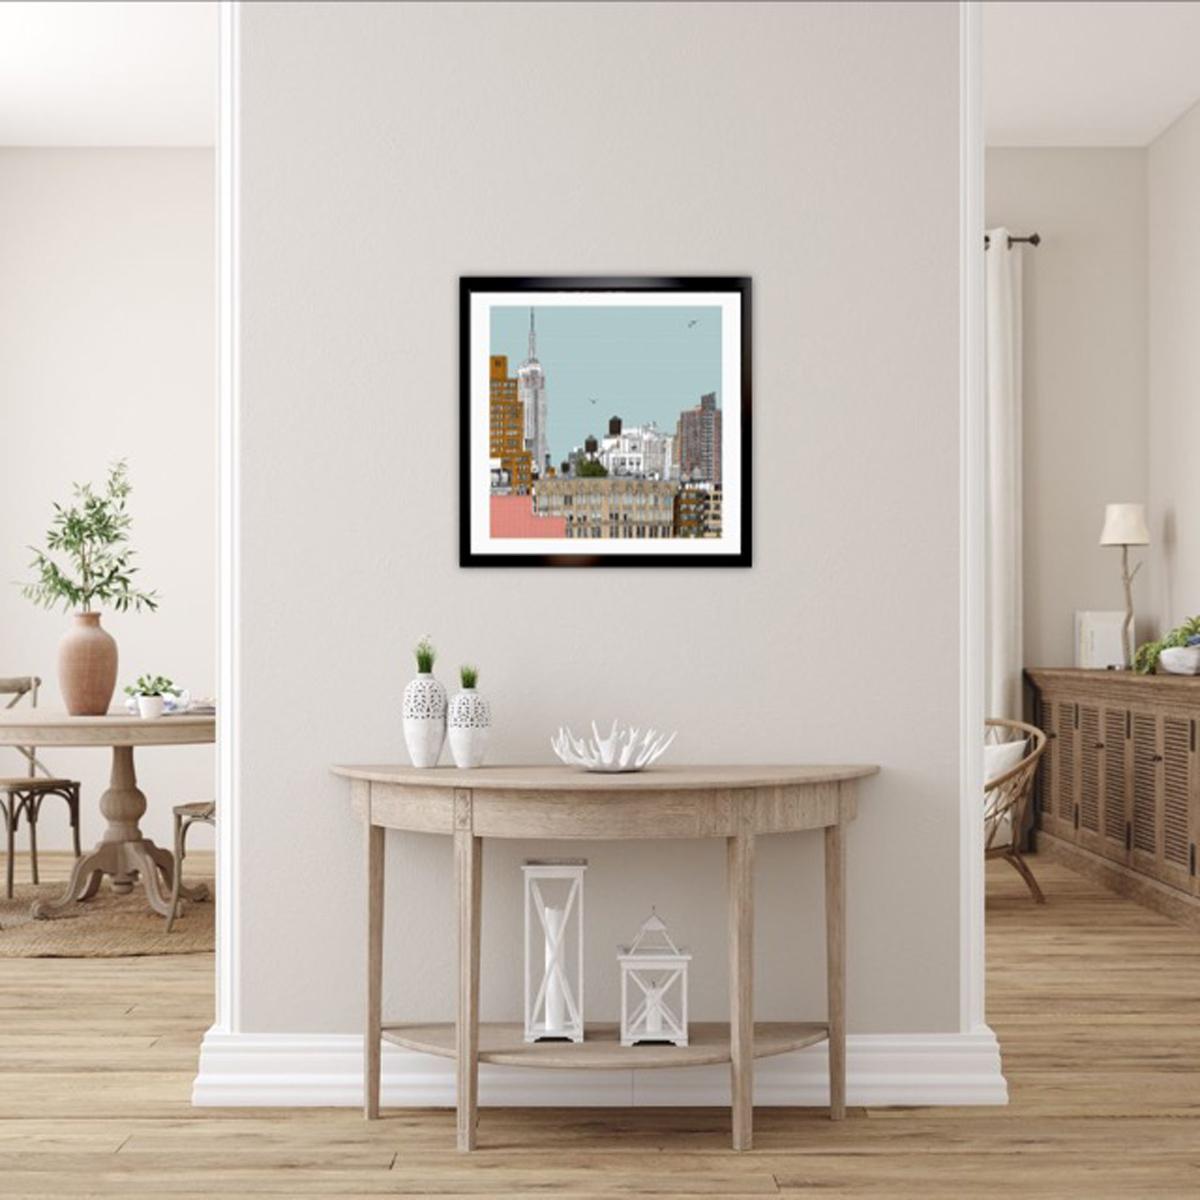 Empire State on the Side, Clare Halifax, Illustration Art, Cityscape ScreenPrint For Sale 1